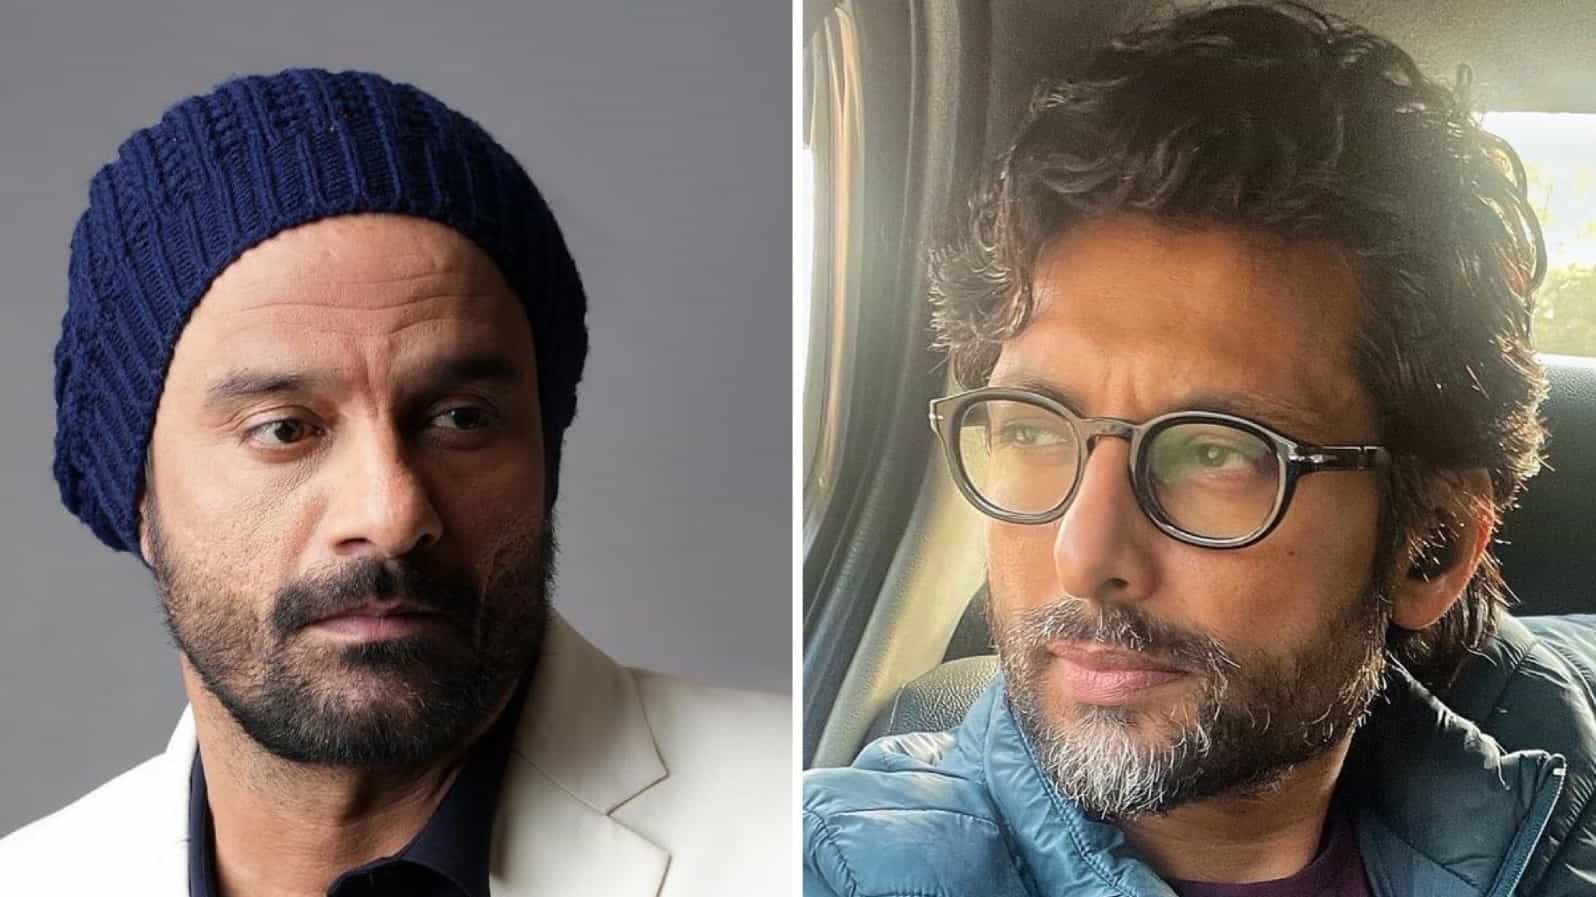 The Broken News actor Indraneil Sengupta on Jaideep Ahlawat: He is an actor from a different planet